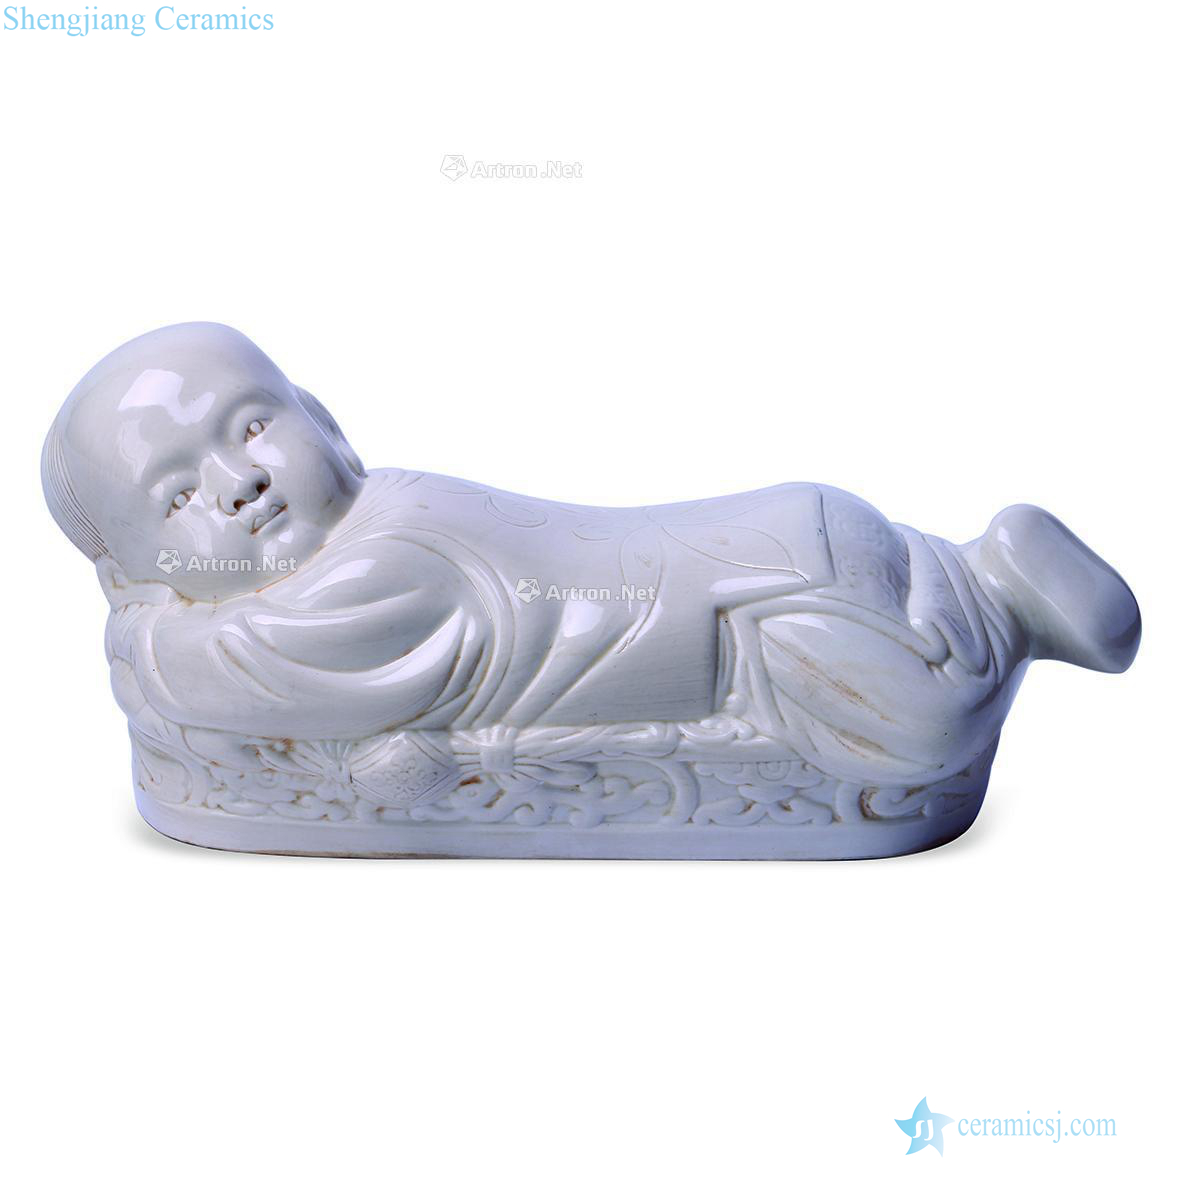 The song dynasty kiln child pillow